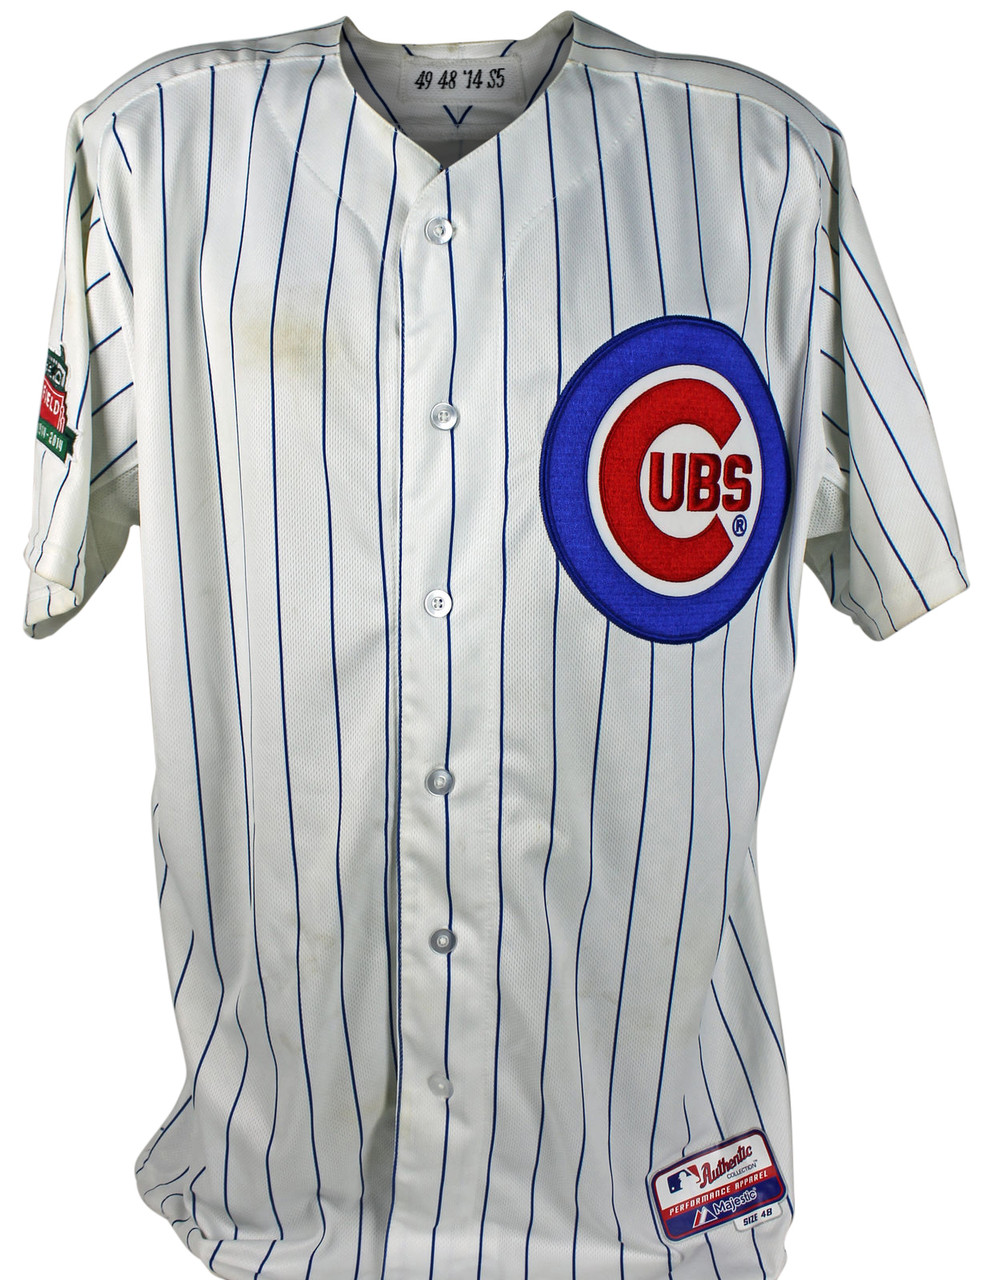 Press Pass Collectibles Cubs Jake Arrieta 9/16/14 1st Career Shutout Game used Jersey MLB & BAS